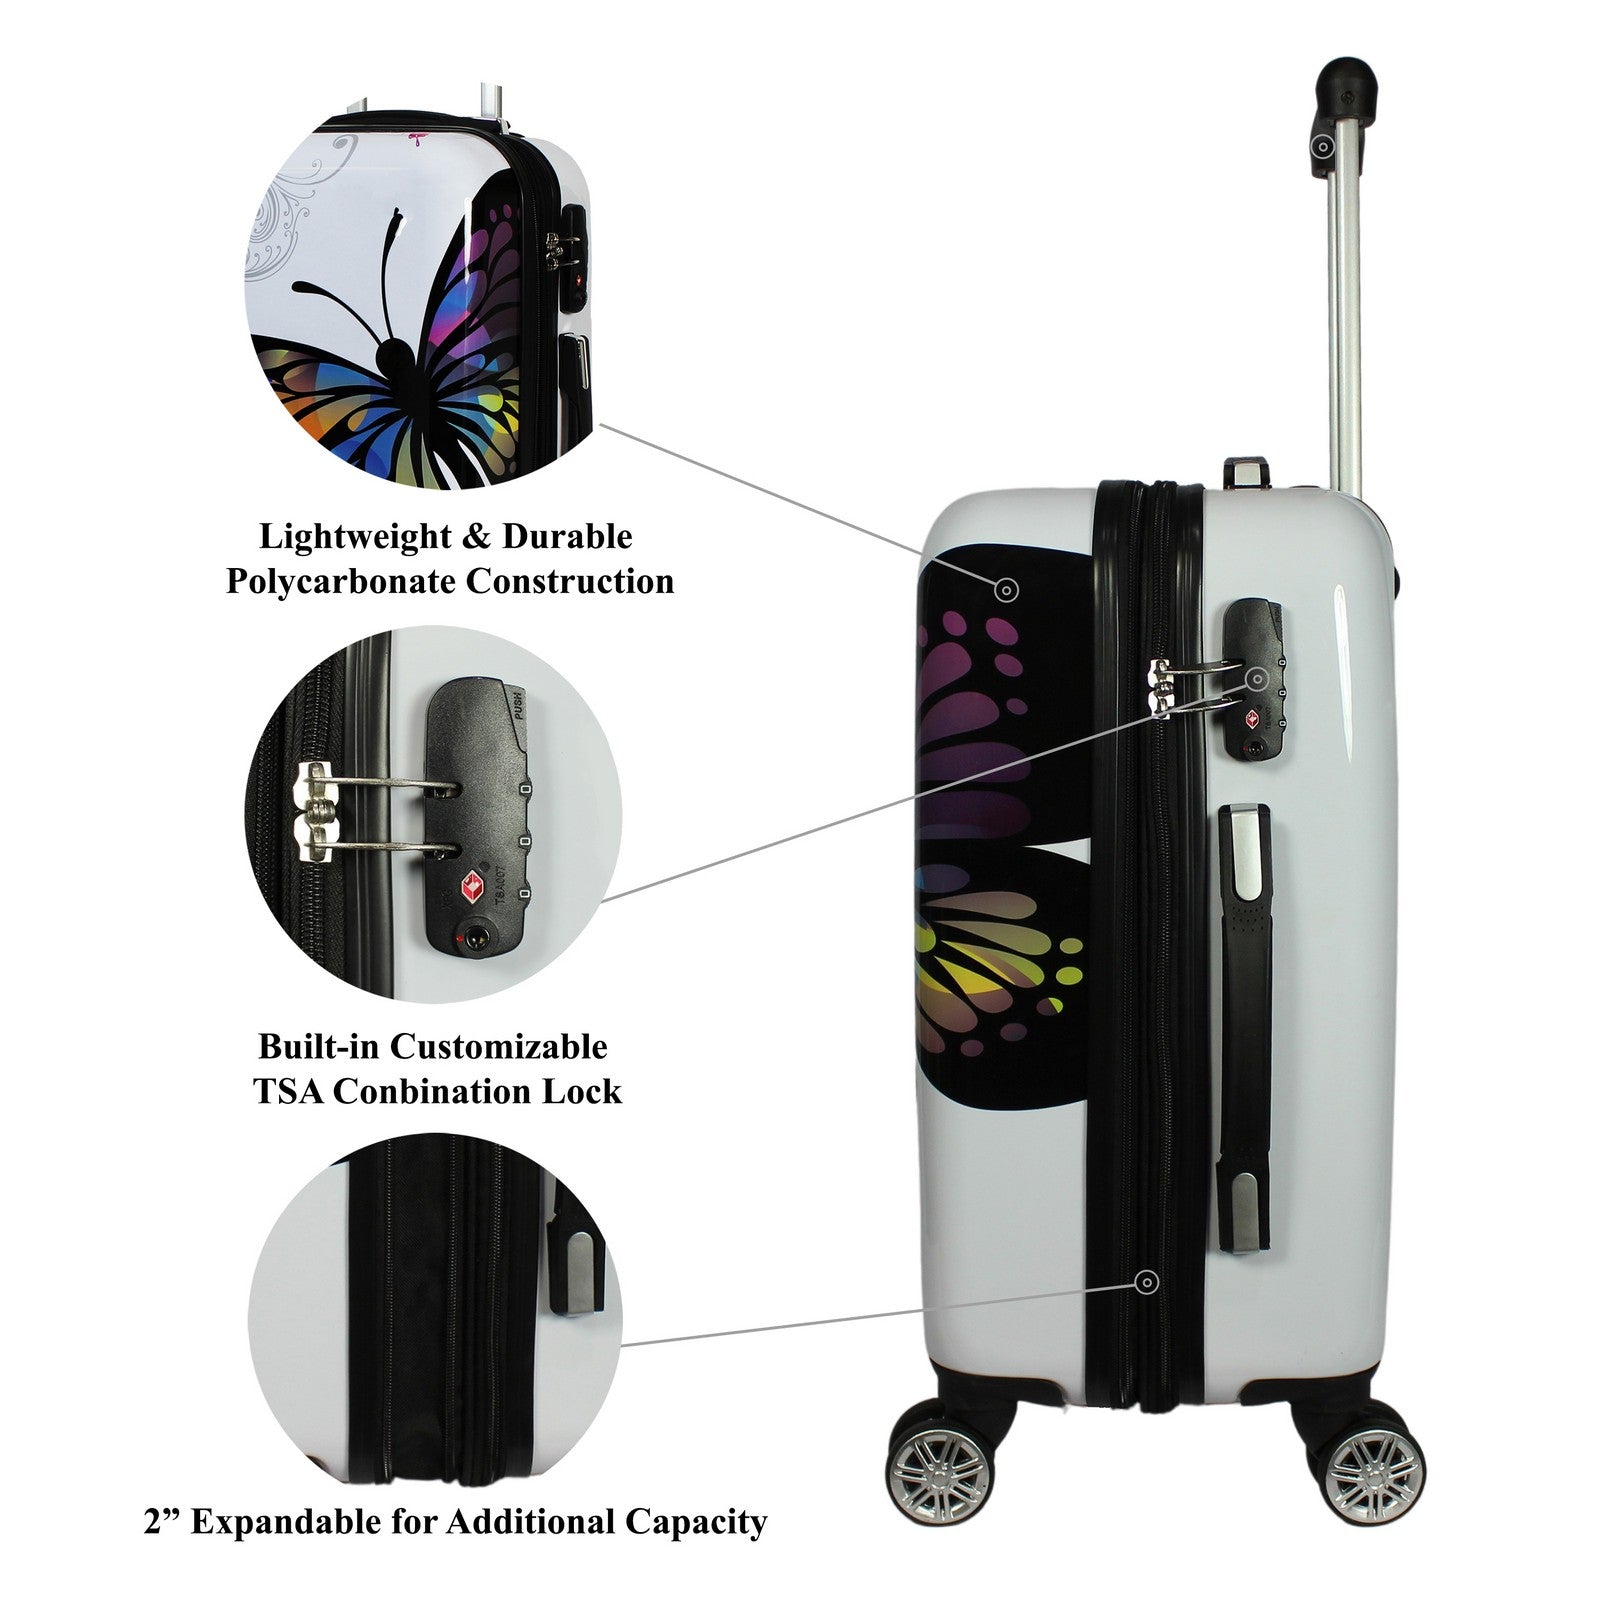 World Traveler Butterfly 20-Inch Carry-On Hardside Expandable Spinner Luggage